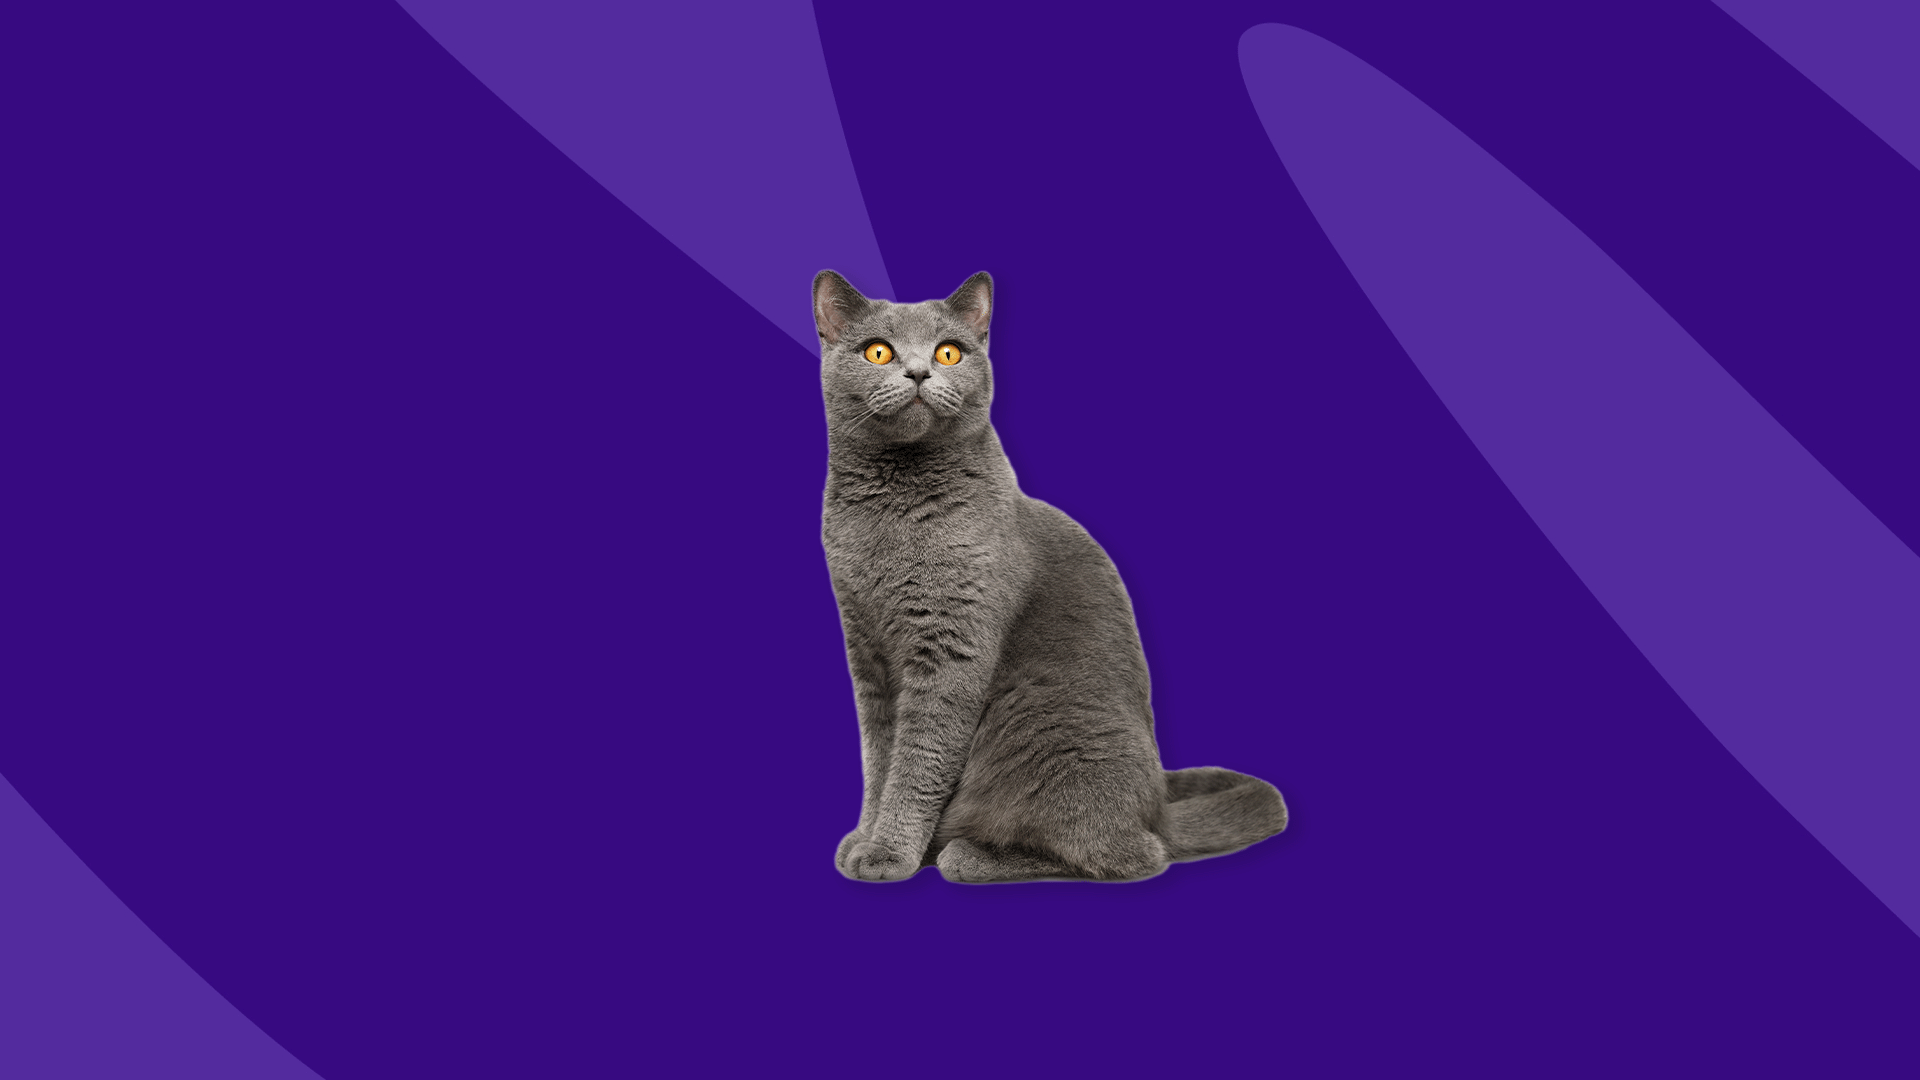 A gray cat - lantus insulin for cats